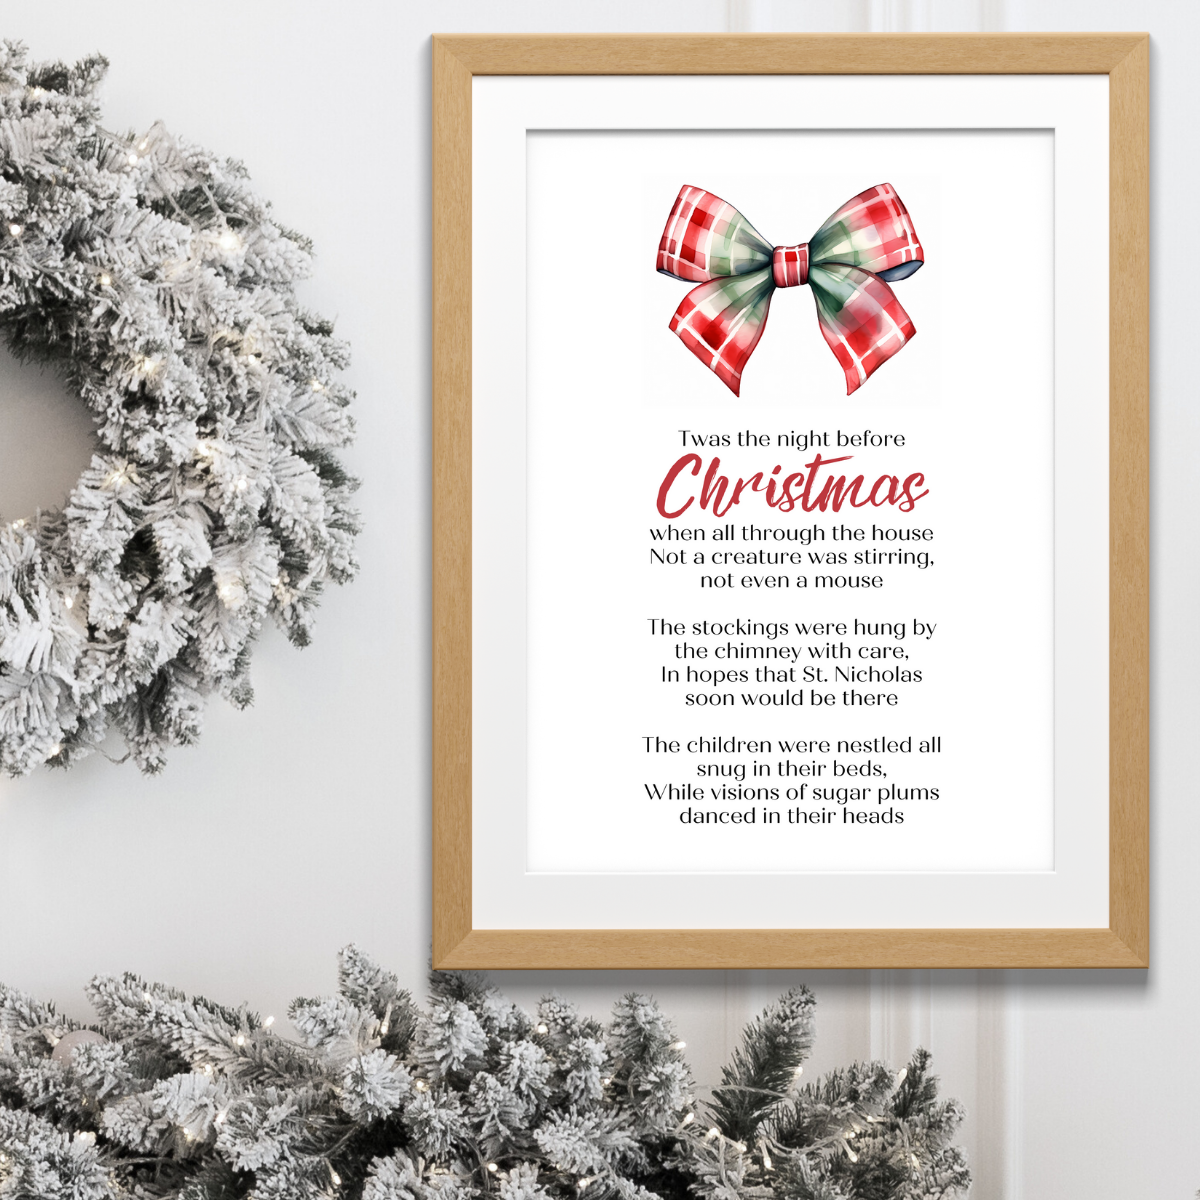 Twas the Night Before Christmas Printable Poster poem in wood frame next to pretty festive wreath for Christmas home Decor in classic traditional red green tartan check Bow Design